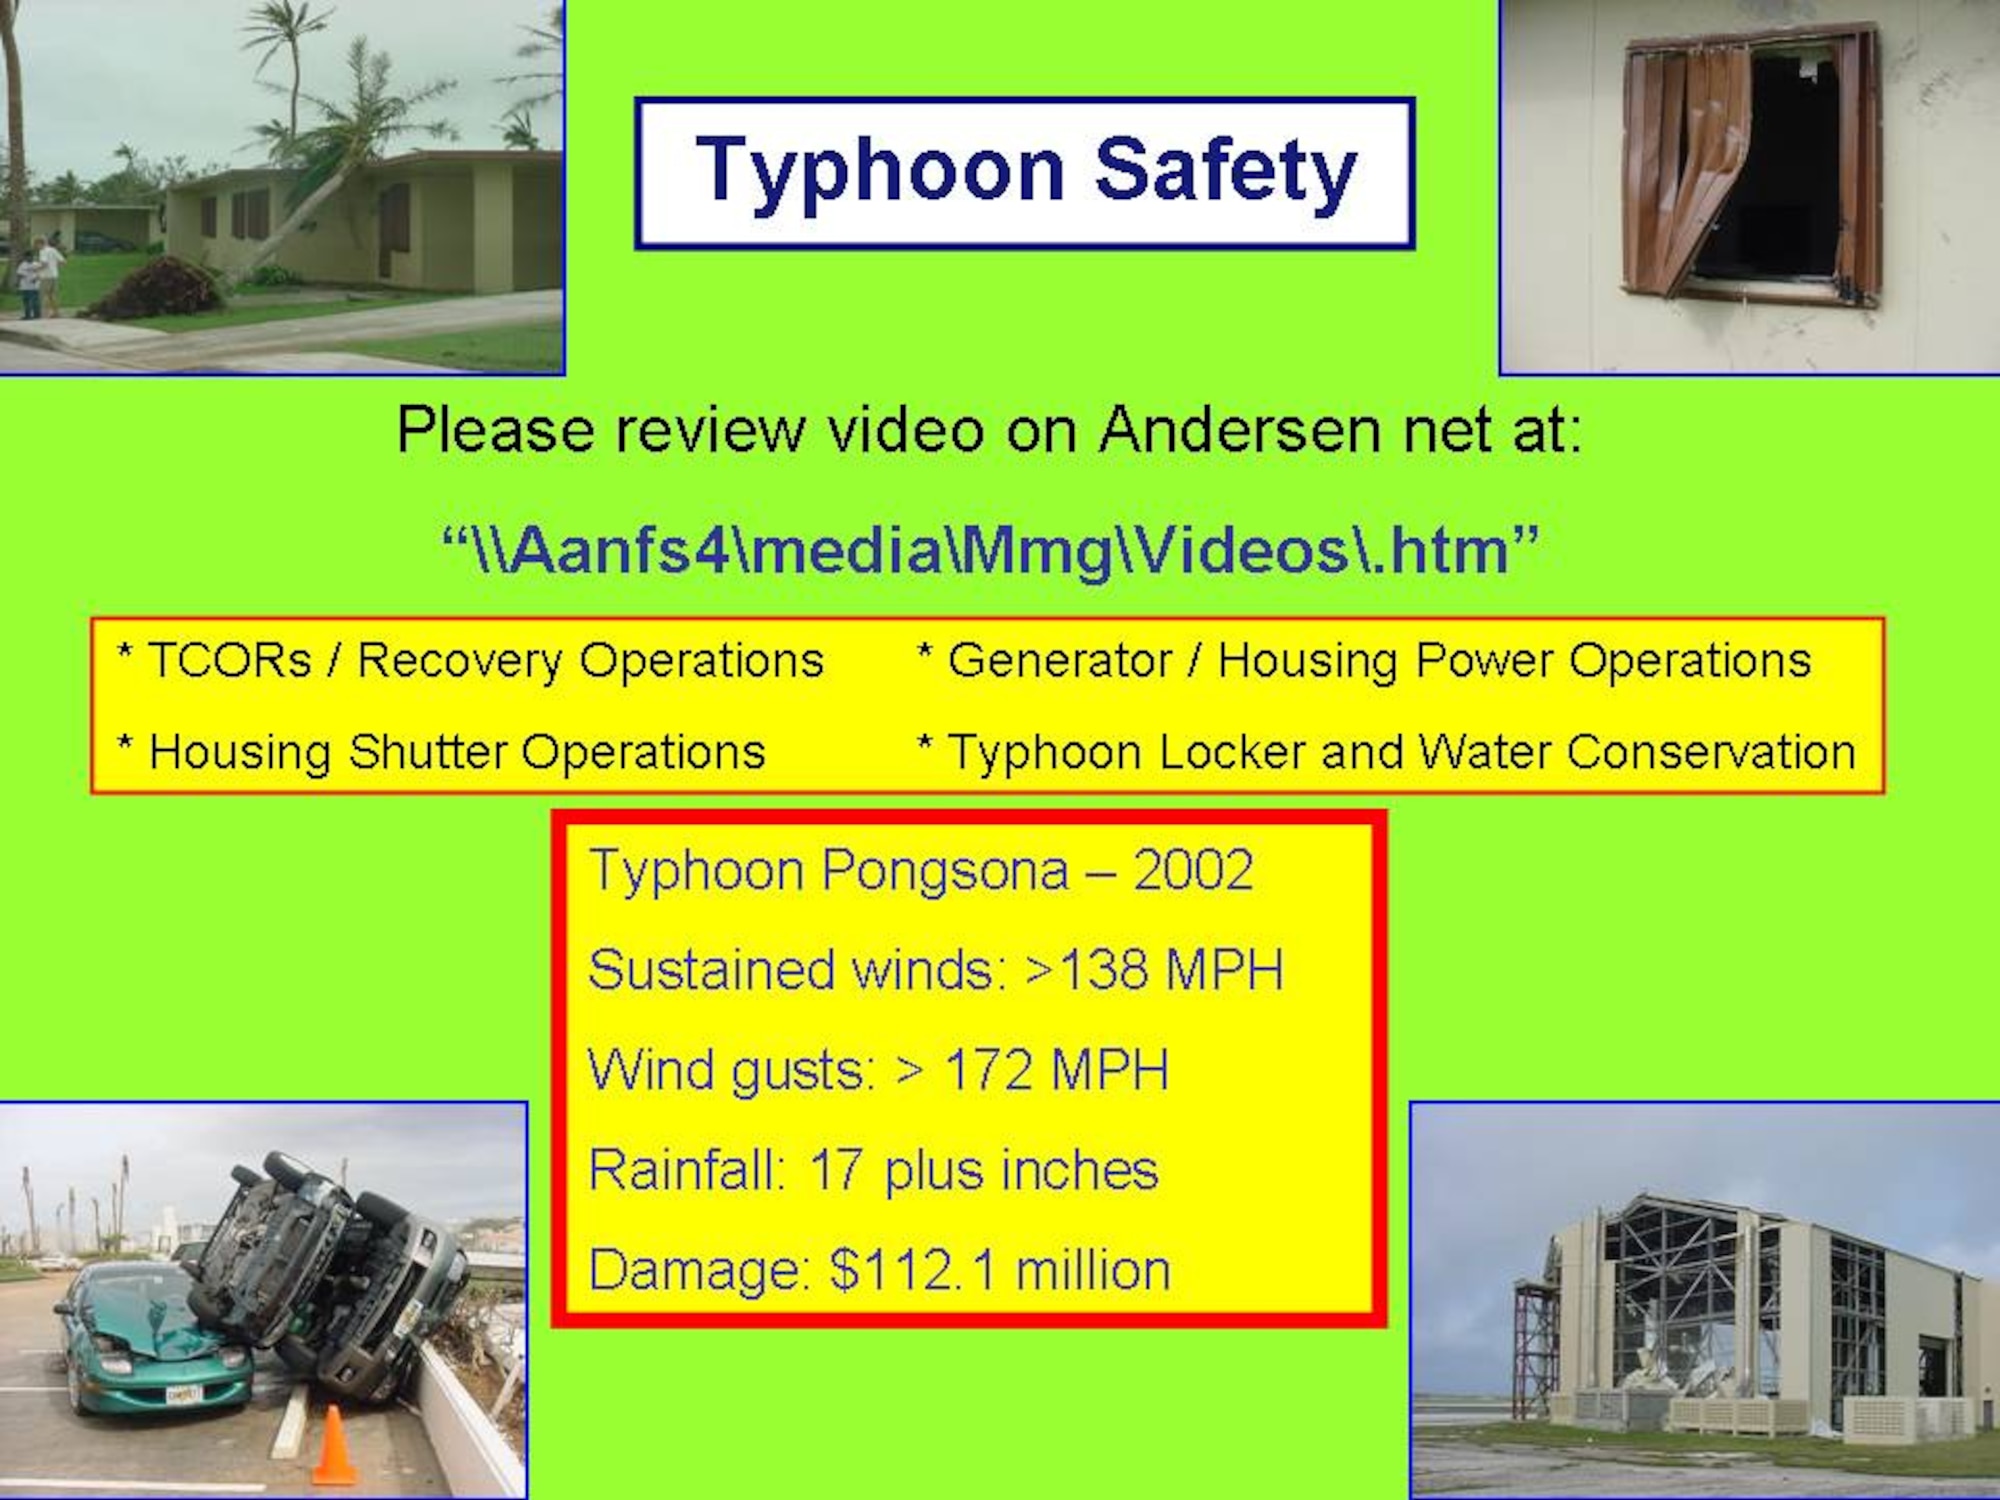 Typhoons should not be taken lightly, and once a storm is identified, precautions should immediately be taken even if the storm is hours or days away. 